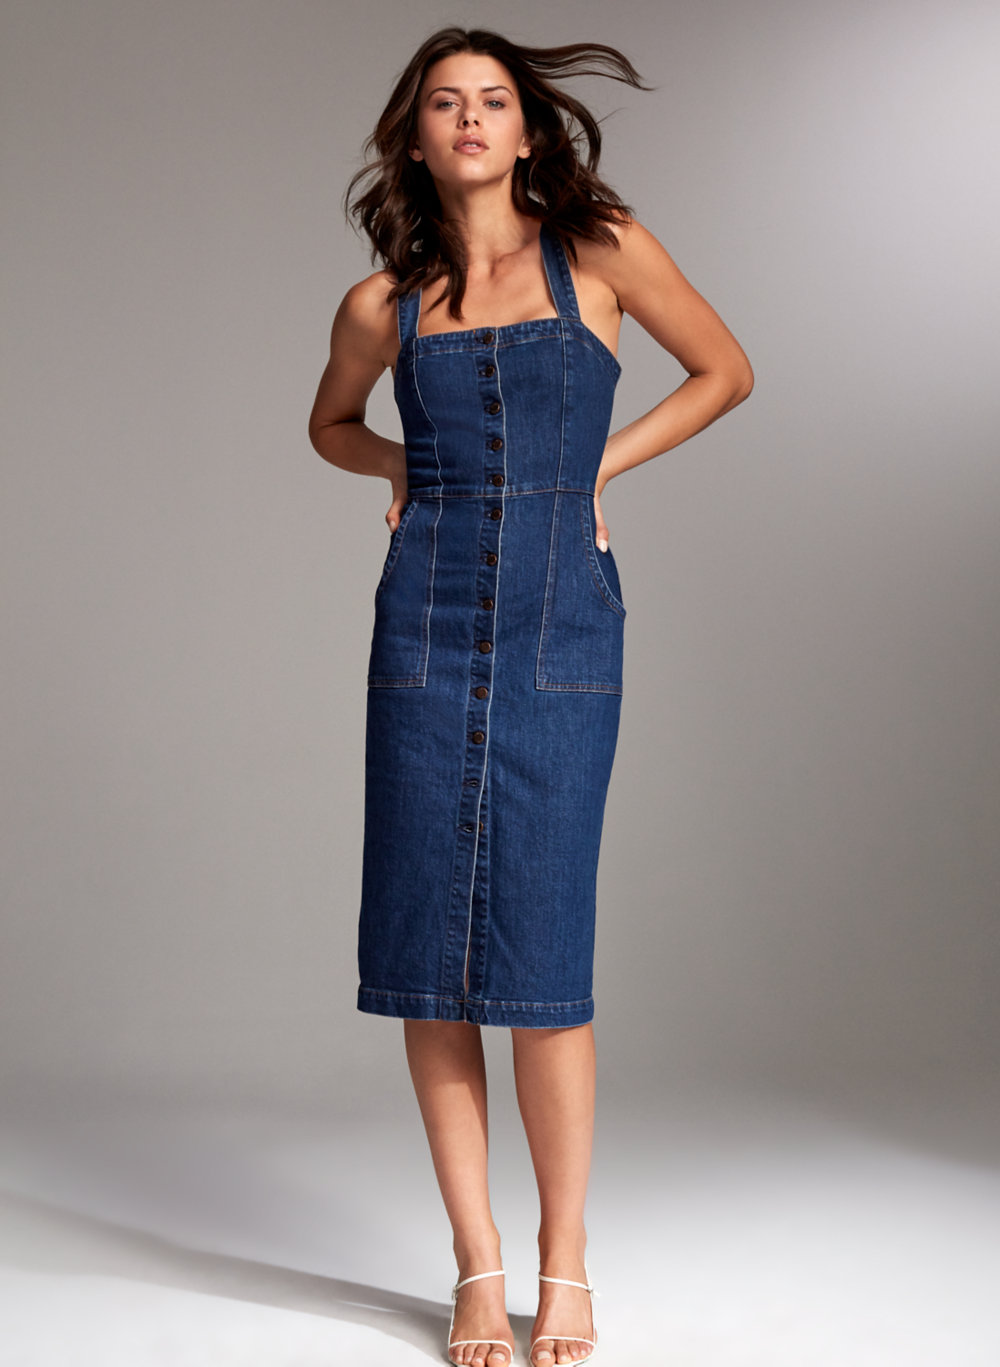 jean dress with buttons